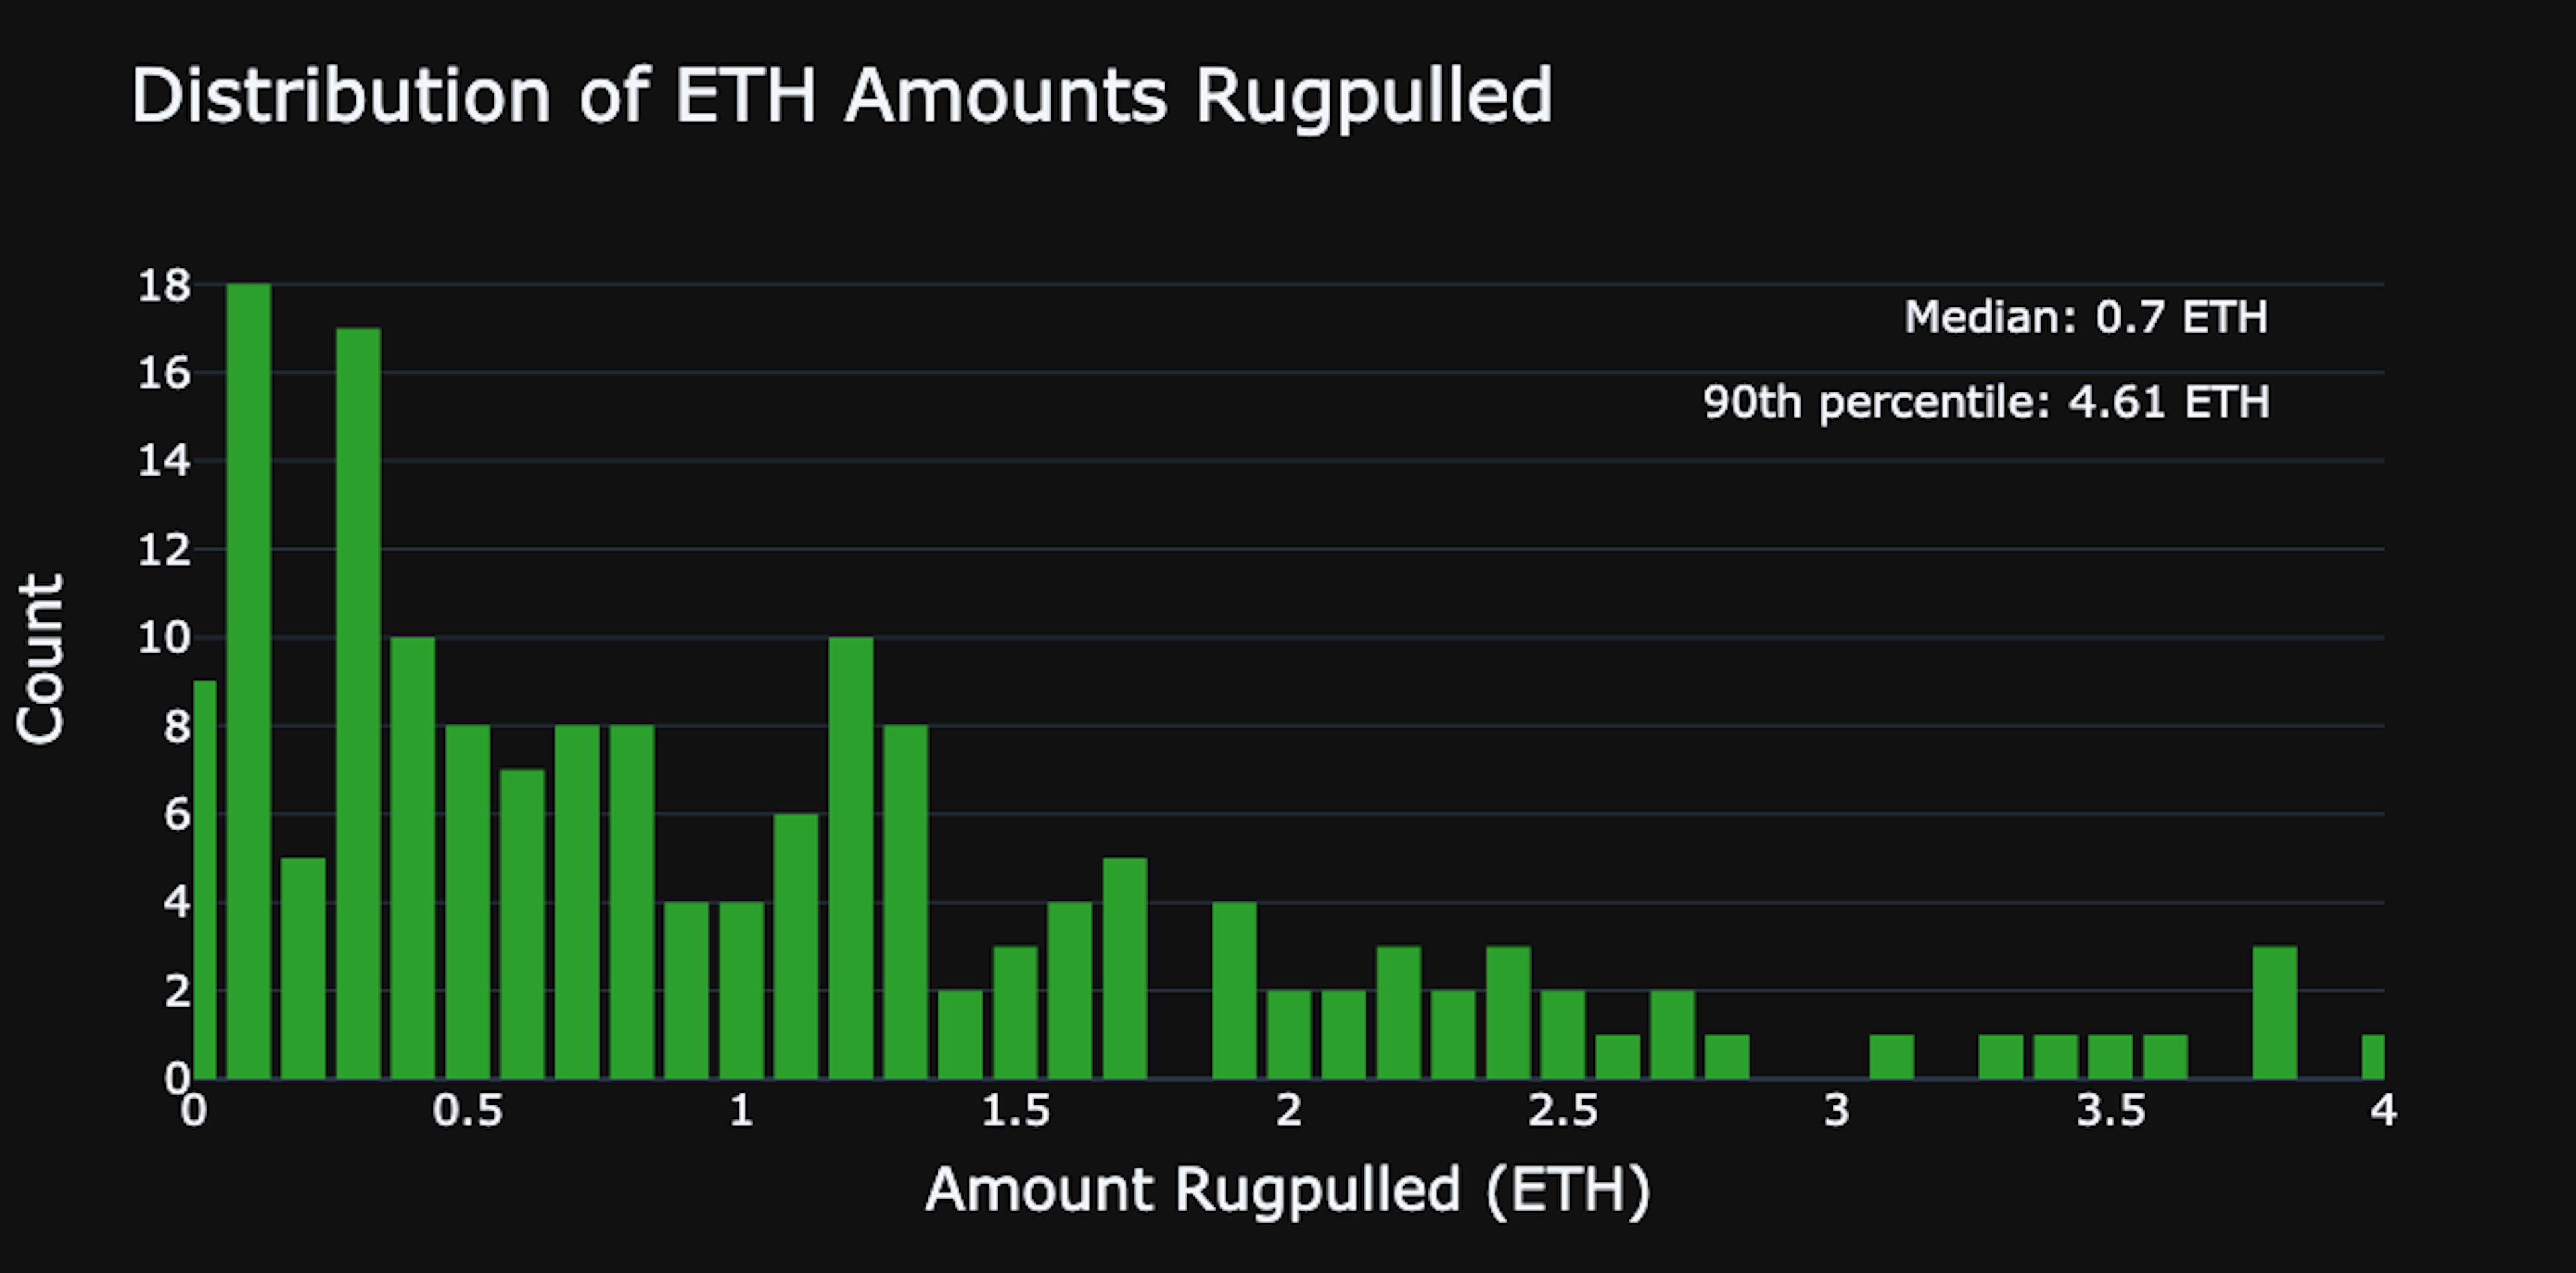 Distribution of ETH Amounts Rug pulled